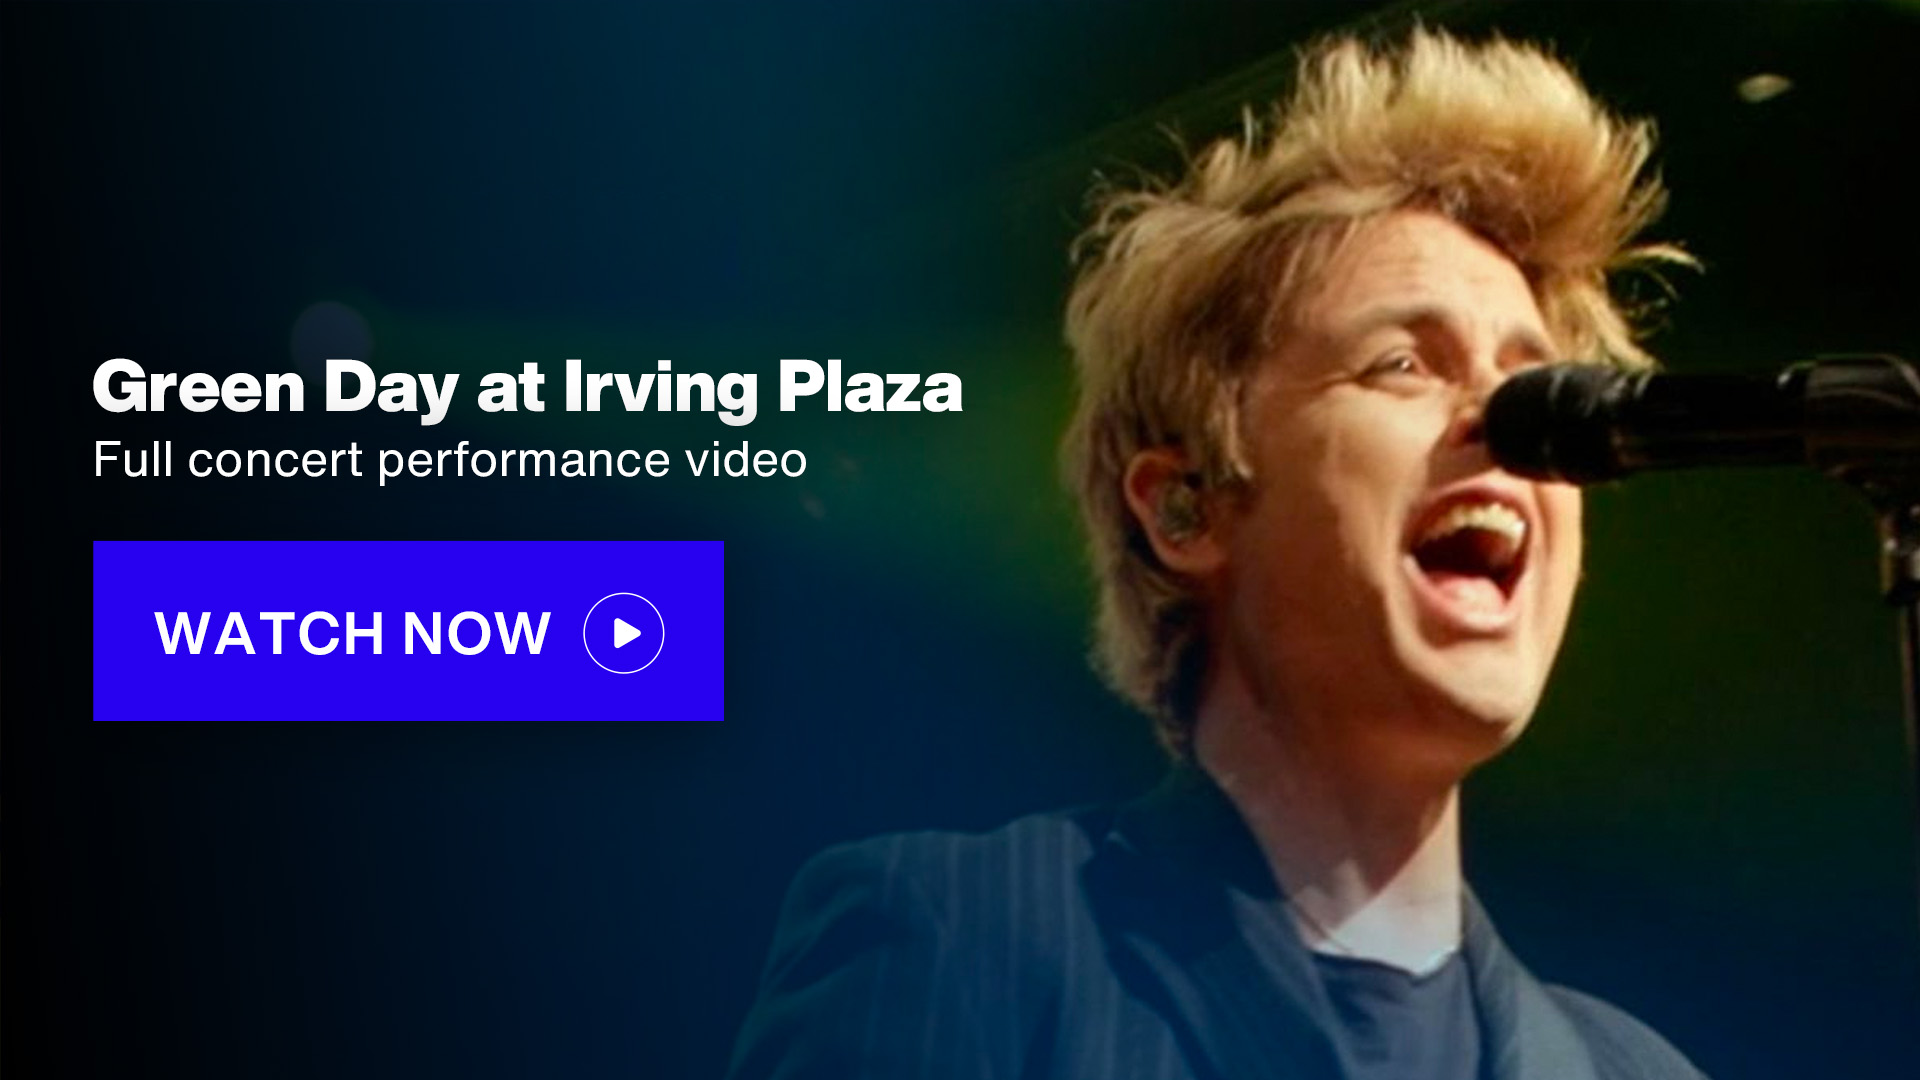 Green Day at Irving Plaza - Full concert performance audio - Watch Now - Billy Joe Armstrong photo